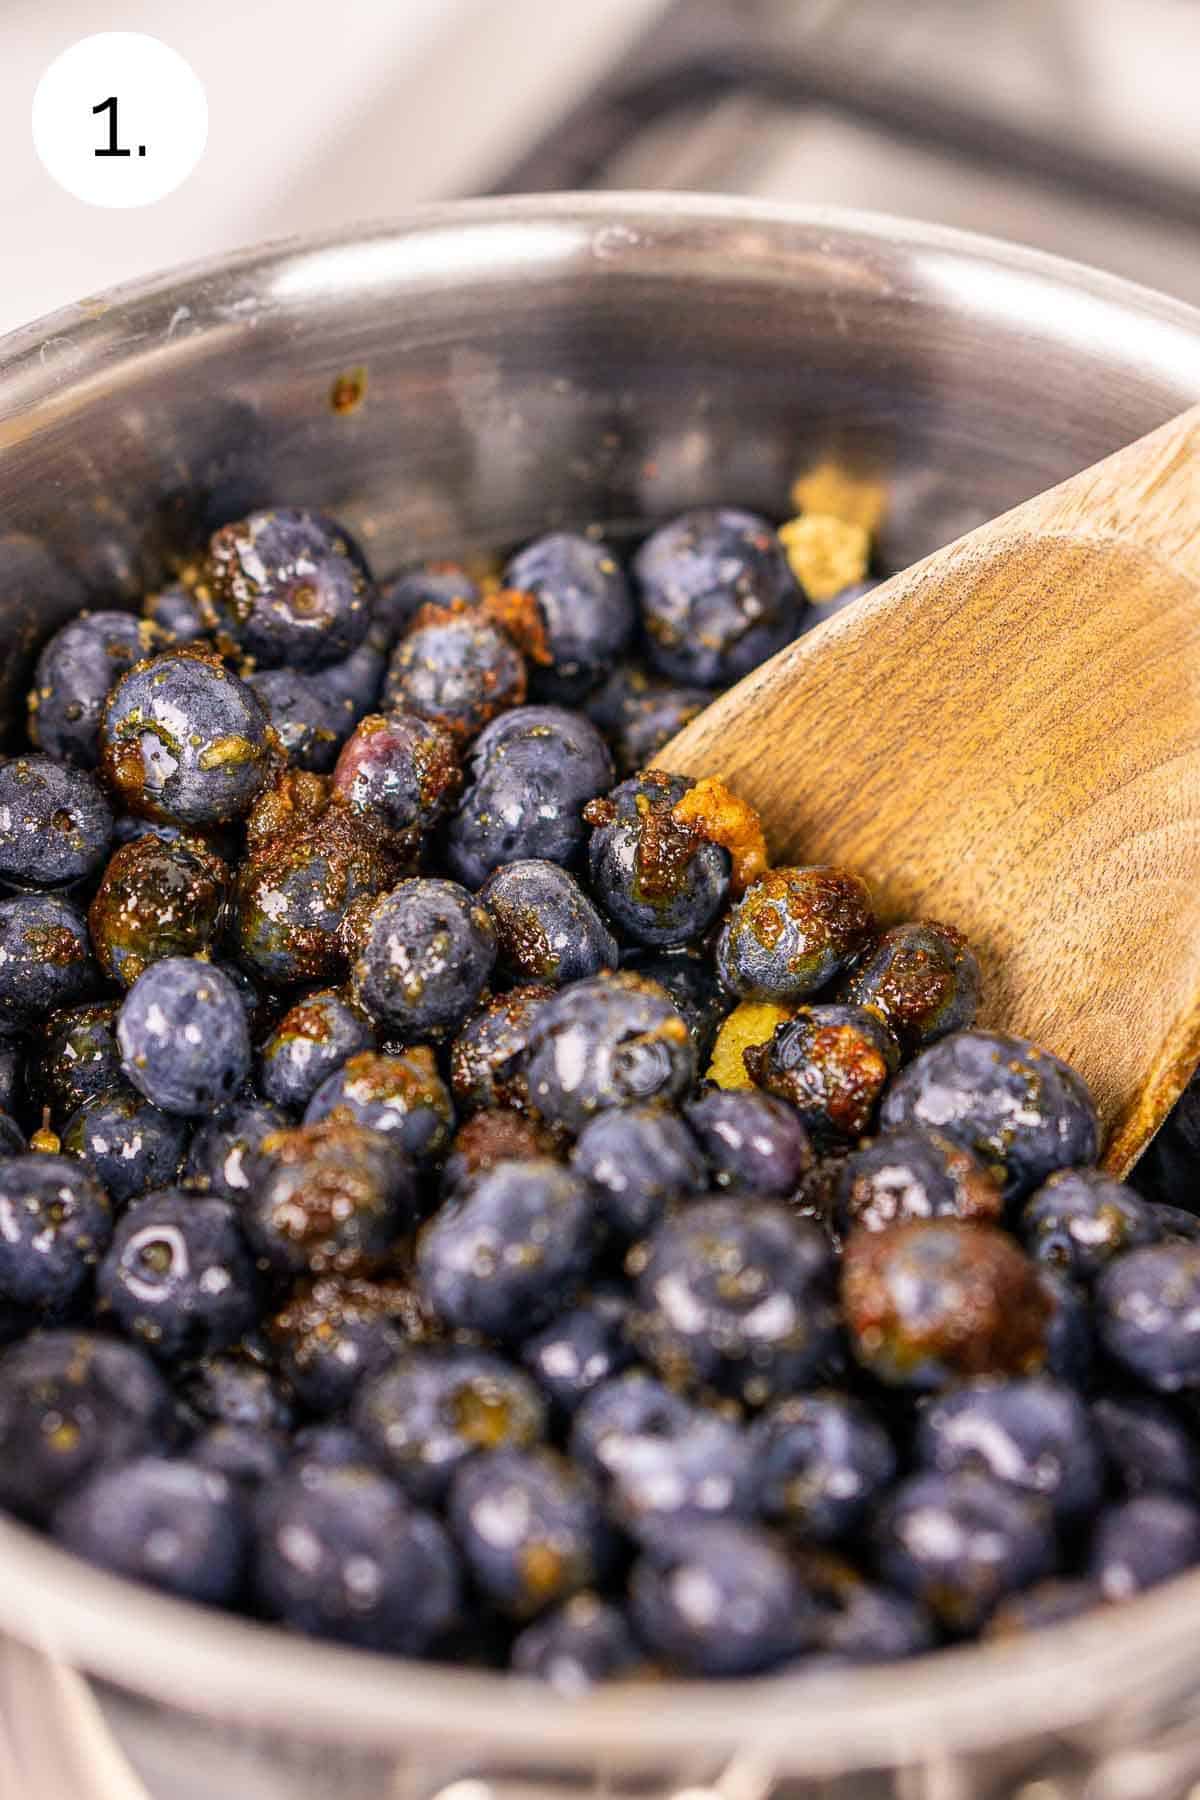 The blueberries and other ingredients in a medium saucepan before cooking down into a sauce.